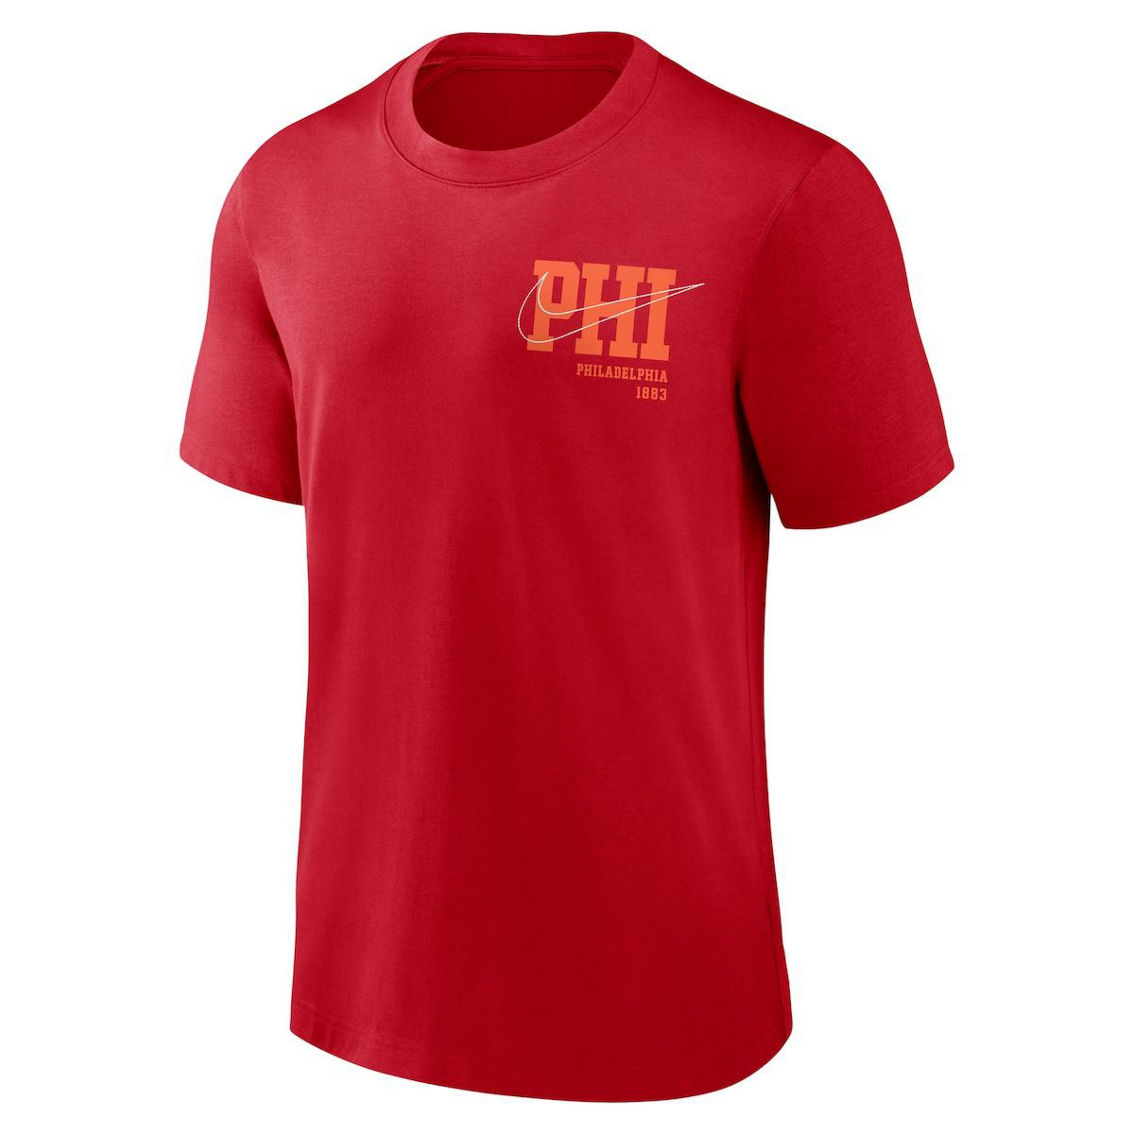 Nike Men's Red Philadelphia Phillies Statement Game Over T-Shirt - Image 3 of 4